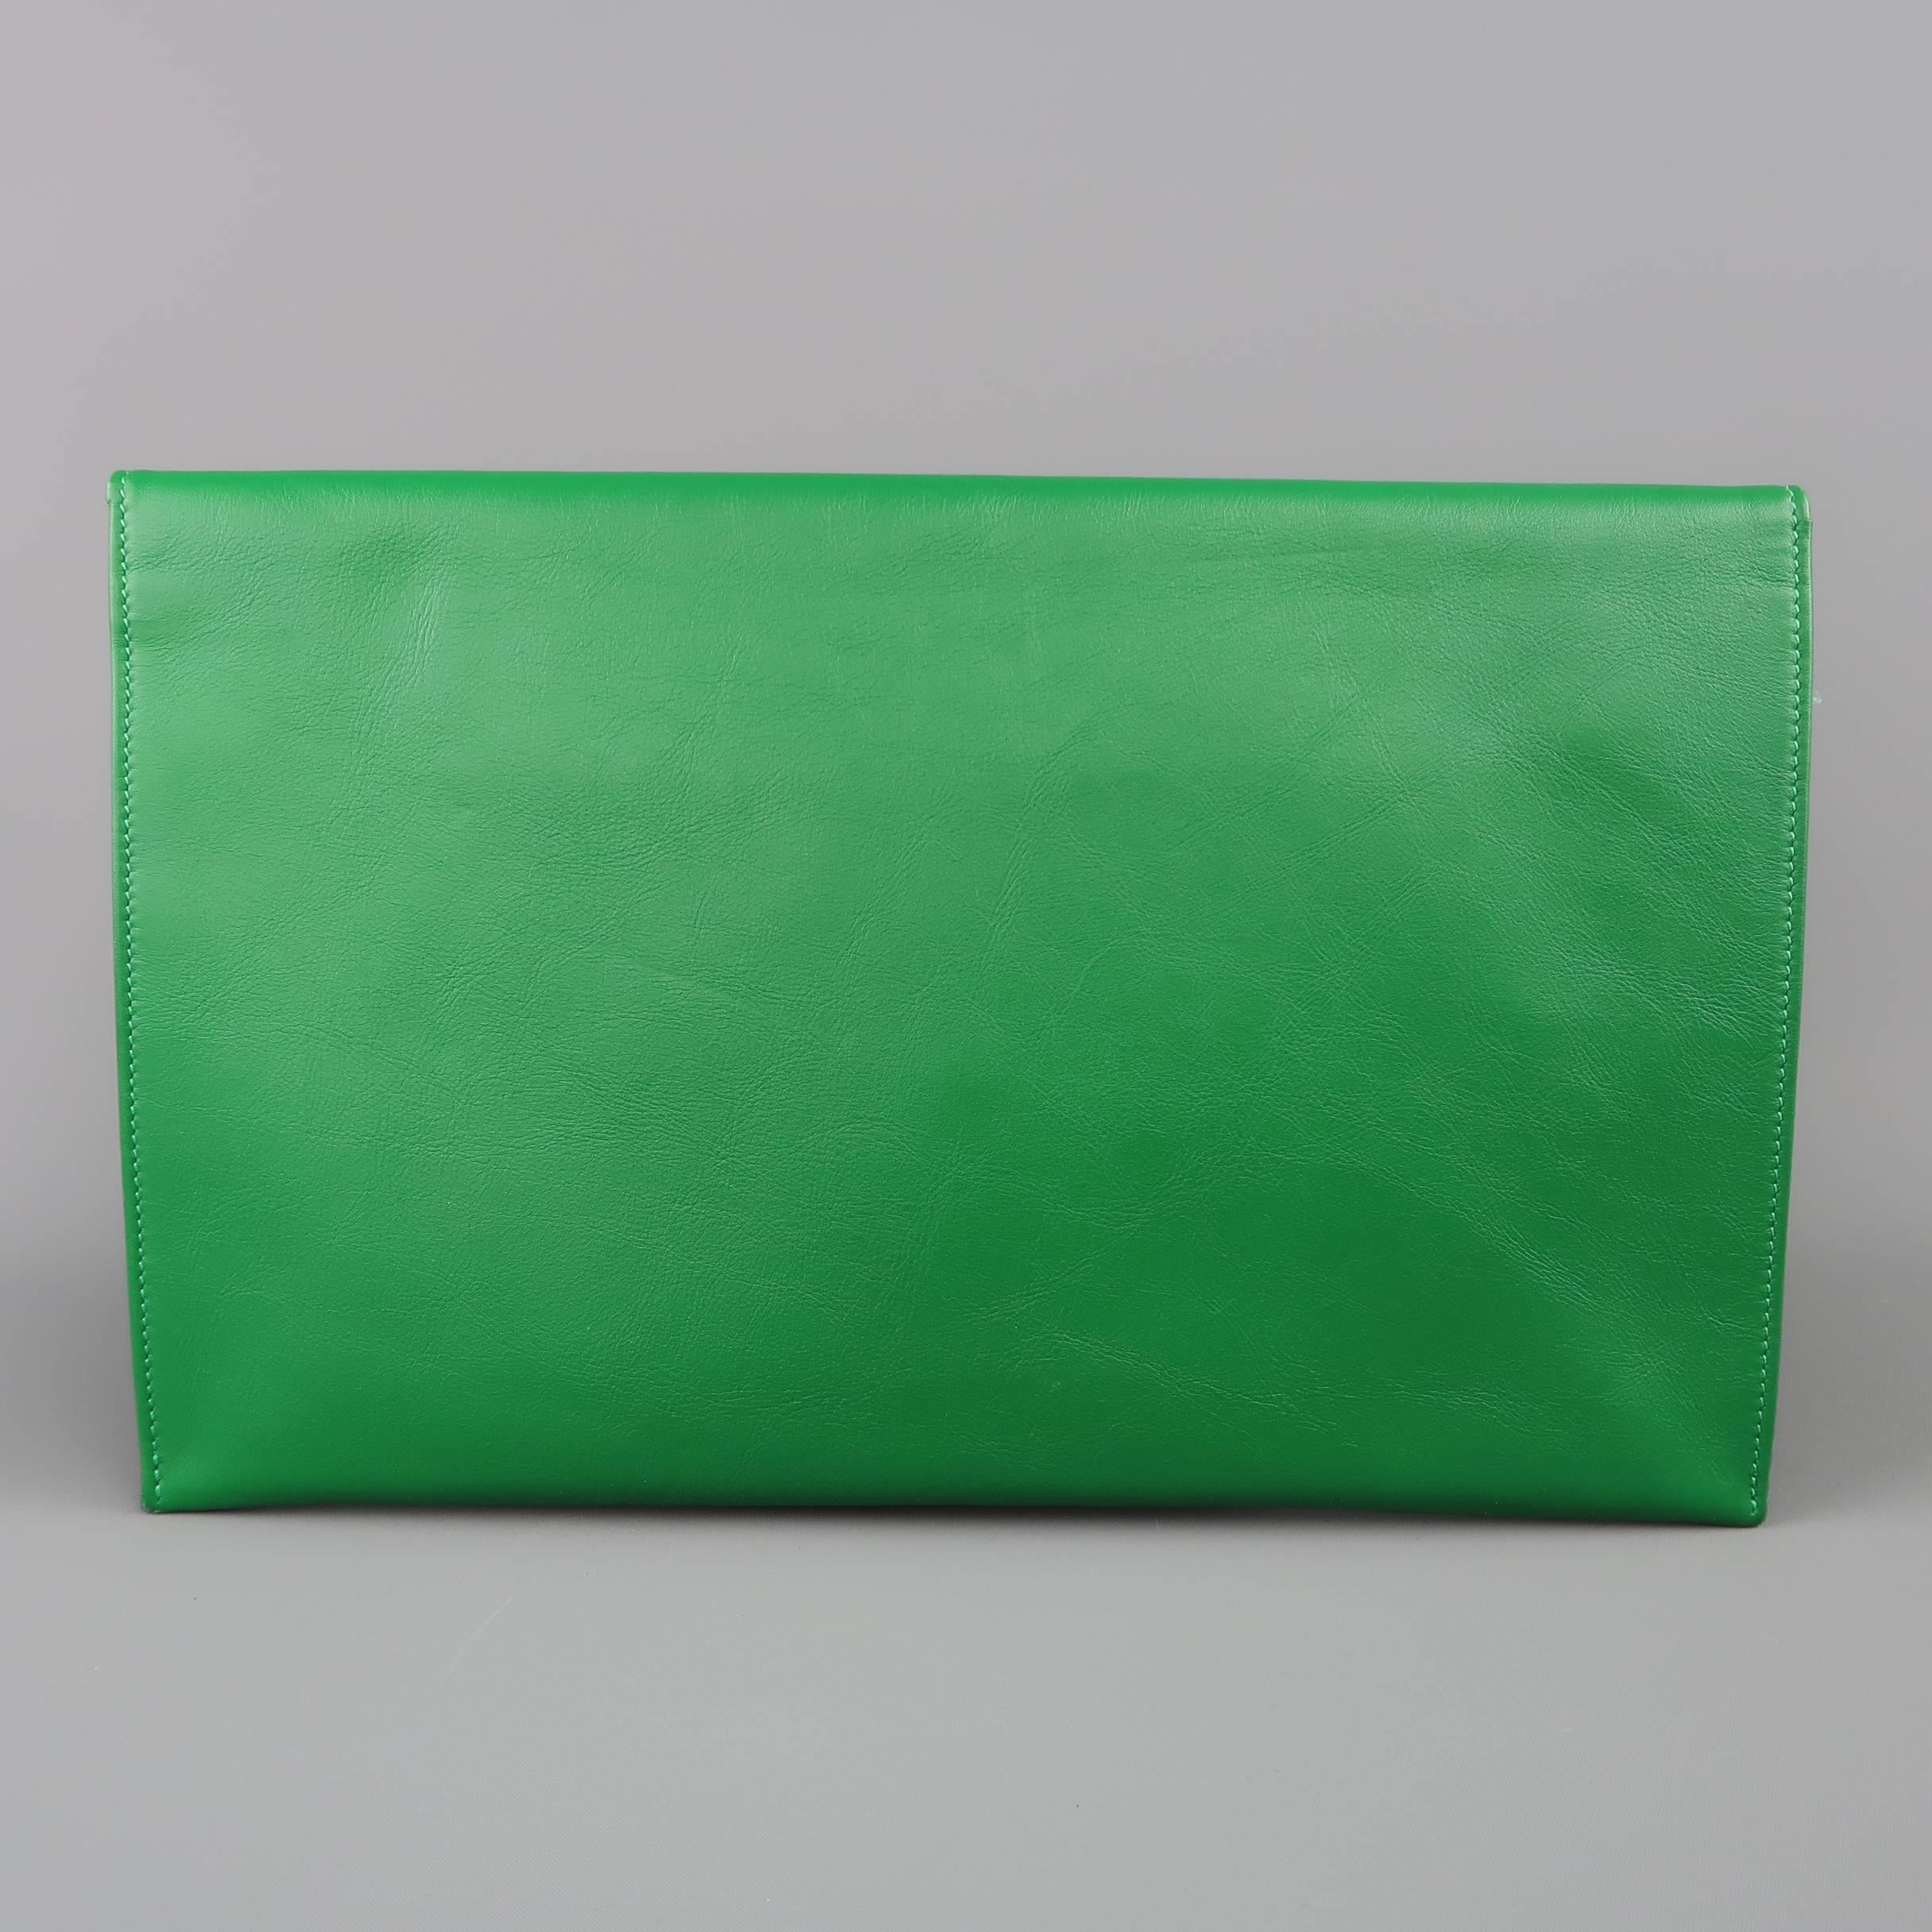 Women's Jimmy Choo Green Leather and Suede Rosetta Envelope Clutch